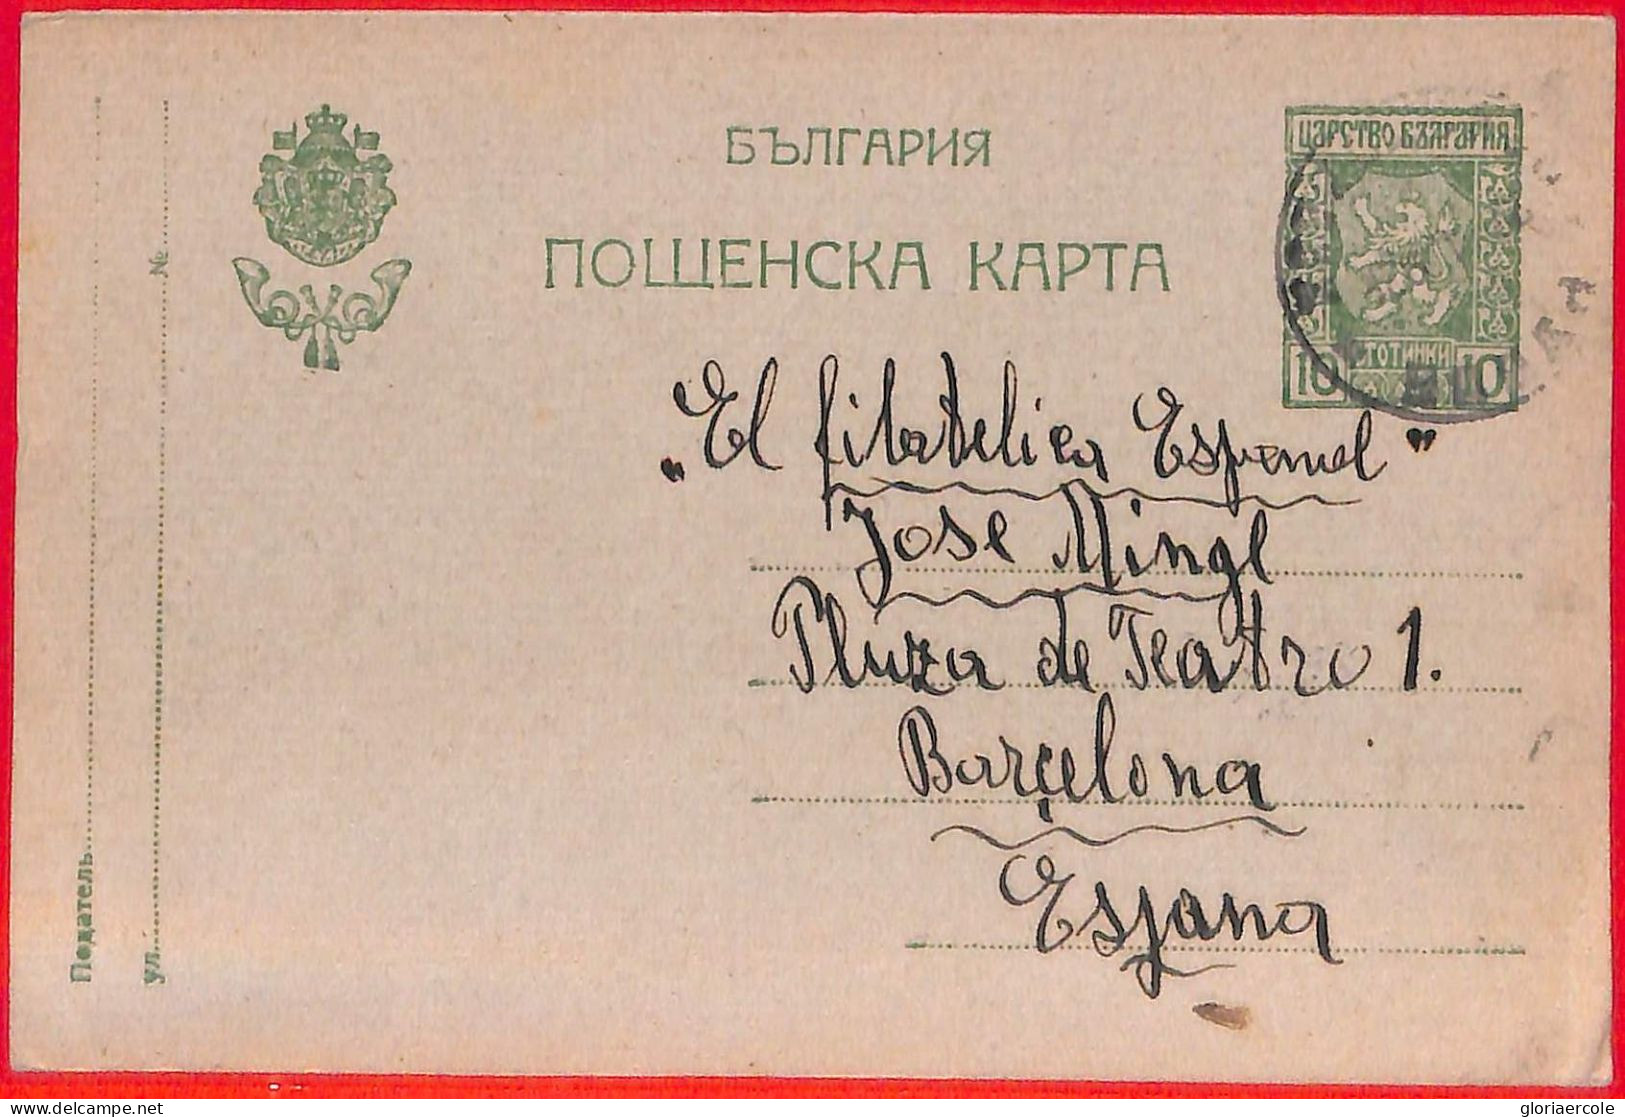 Aa0511 - BULGARIA - Postal History - STATIONERY CARD From ROUSTOUCK To SPAIN 1920's - Postcards